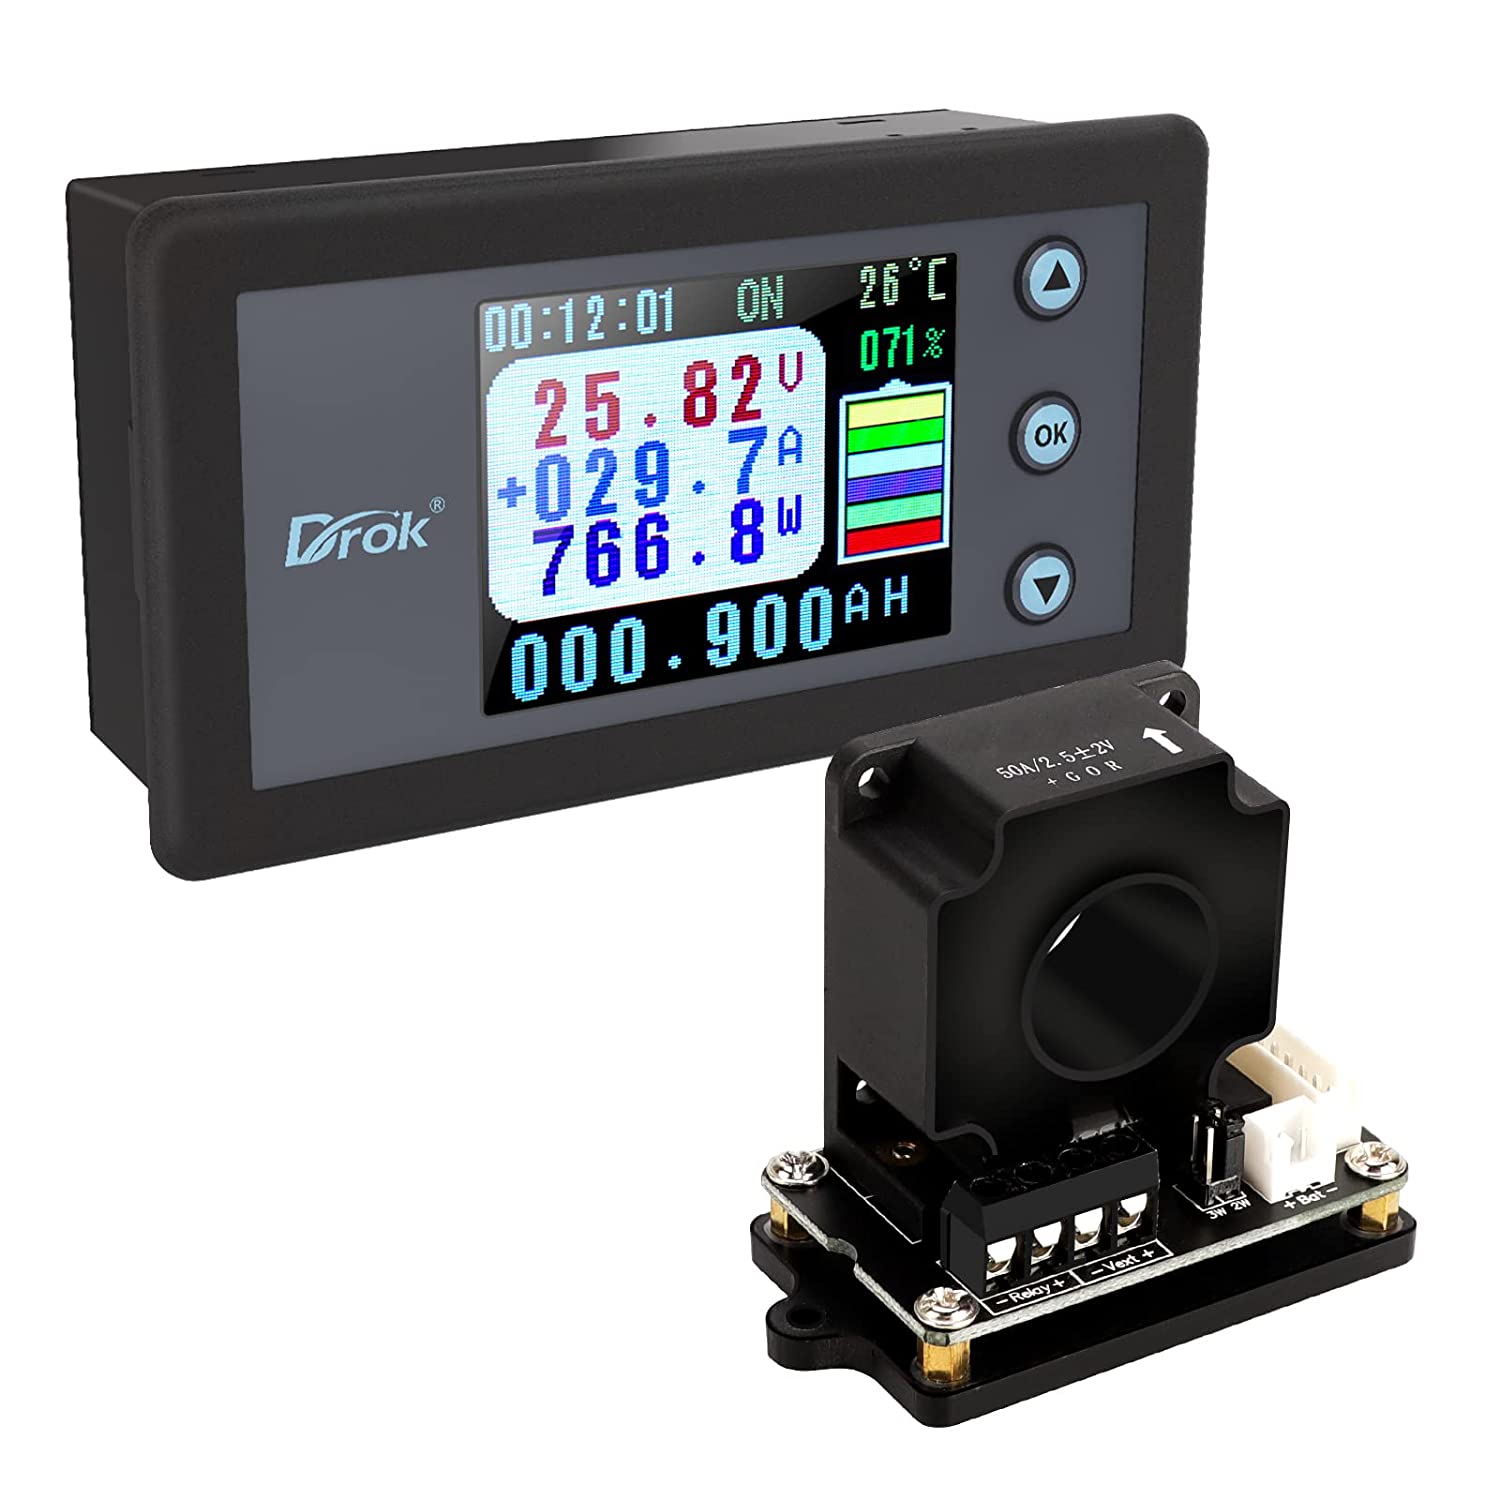 https://www.droking.com/image/cache/catalog/Charge-Discharge-Multi-Testers-DROK-0-120V-50A-DC-Power-Meter-with-Color/Charge-Discharge-Multi-Testers-DROK-0-120V-50A-DC-Power-Meter-with-Color-LCD-Dis-1500x1500.jpg